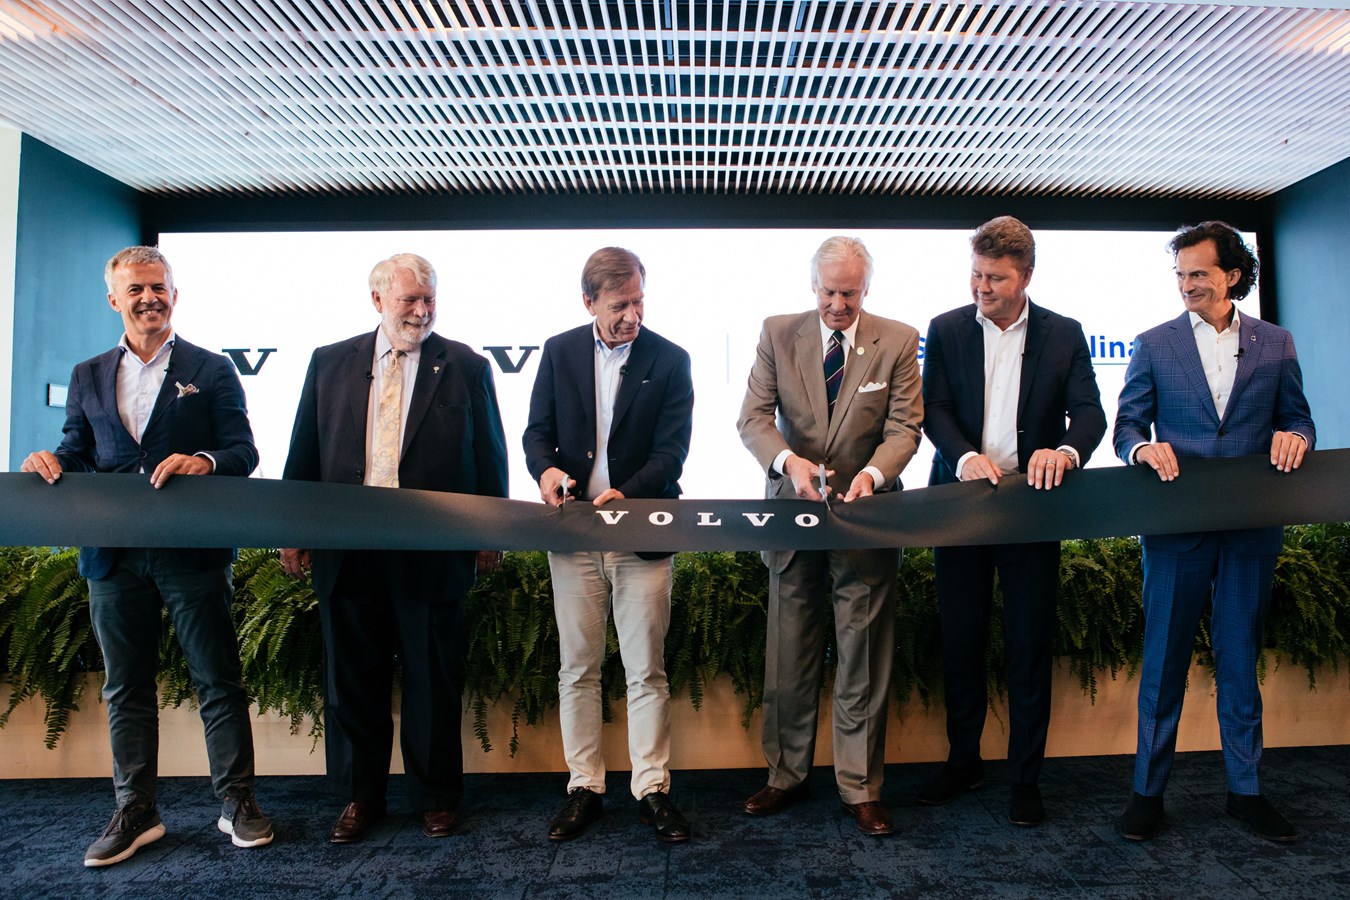 Volvo Cars Officially Opens Volvo Car University Campus in South Carolina